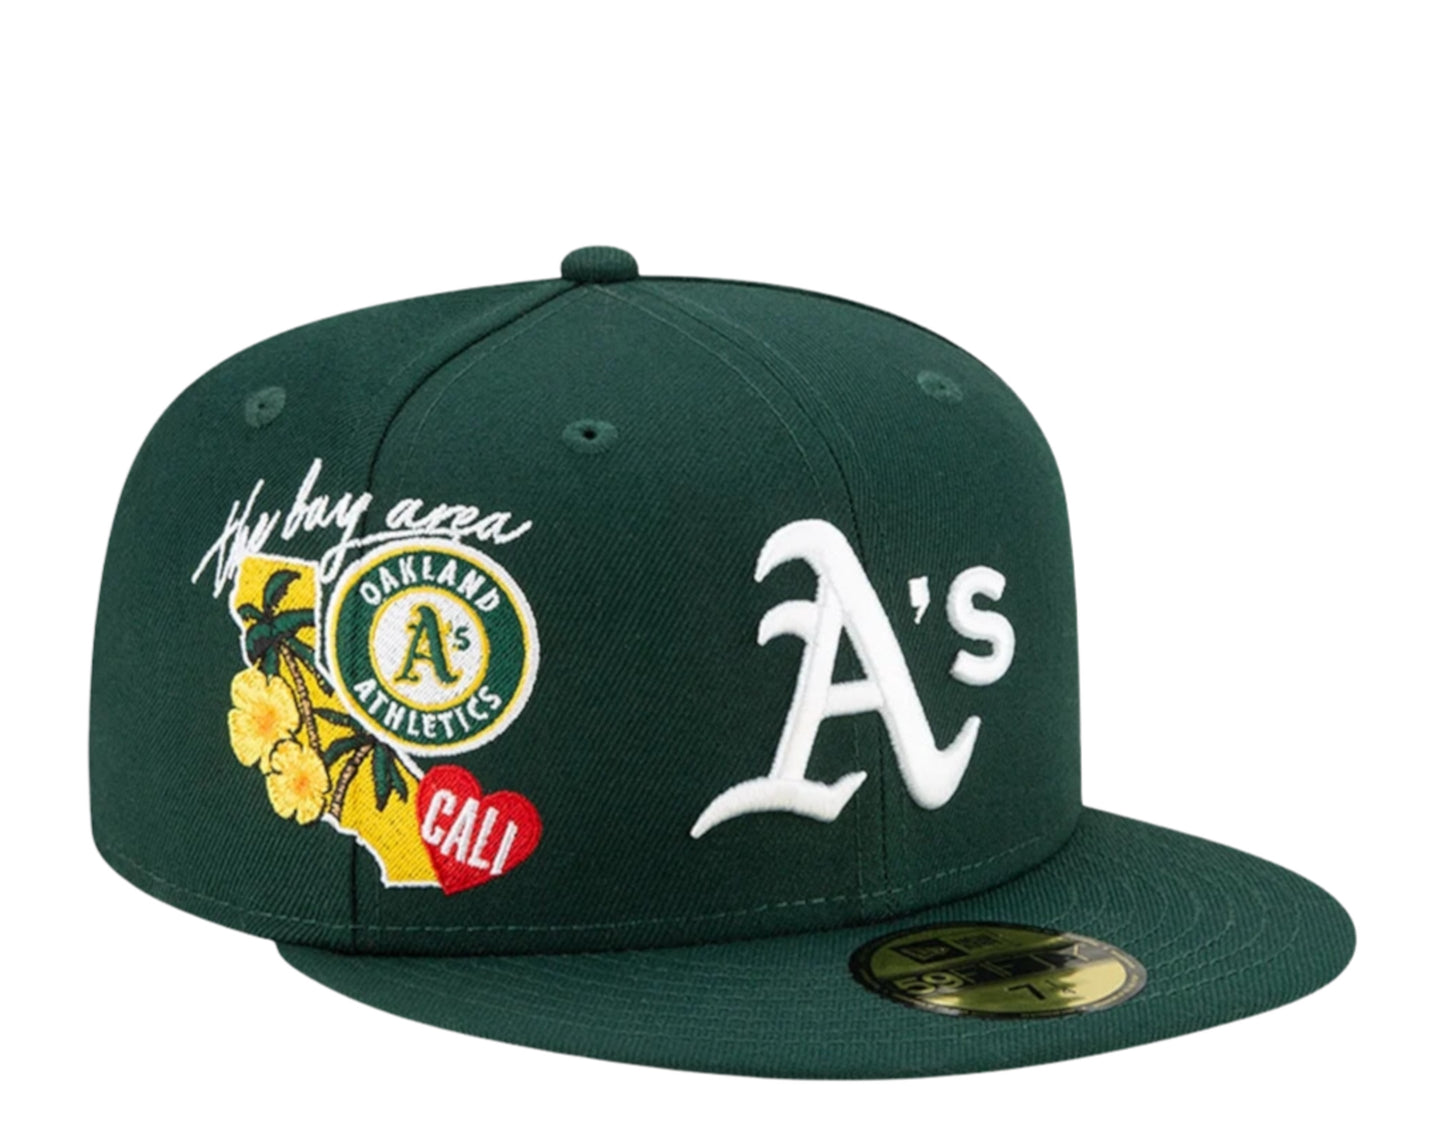 New Era 59Fifty MLB Oakland Athletics City Cluster Fitted Hat